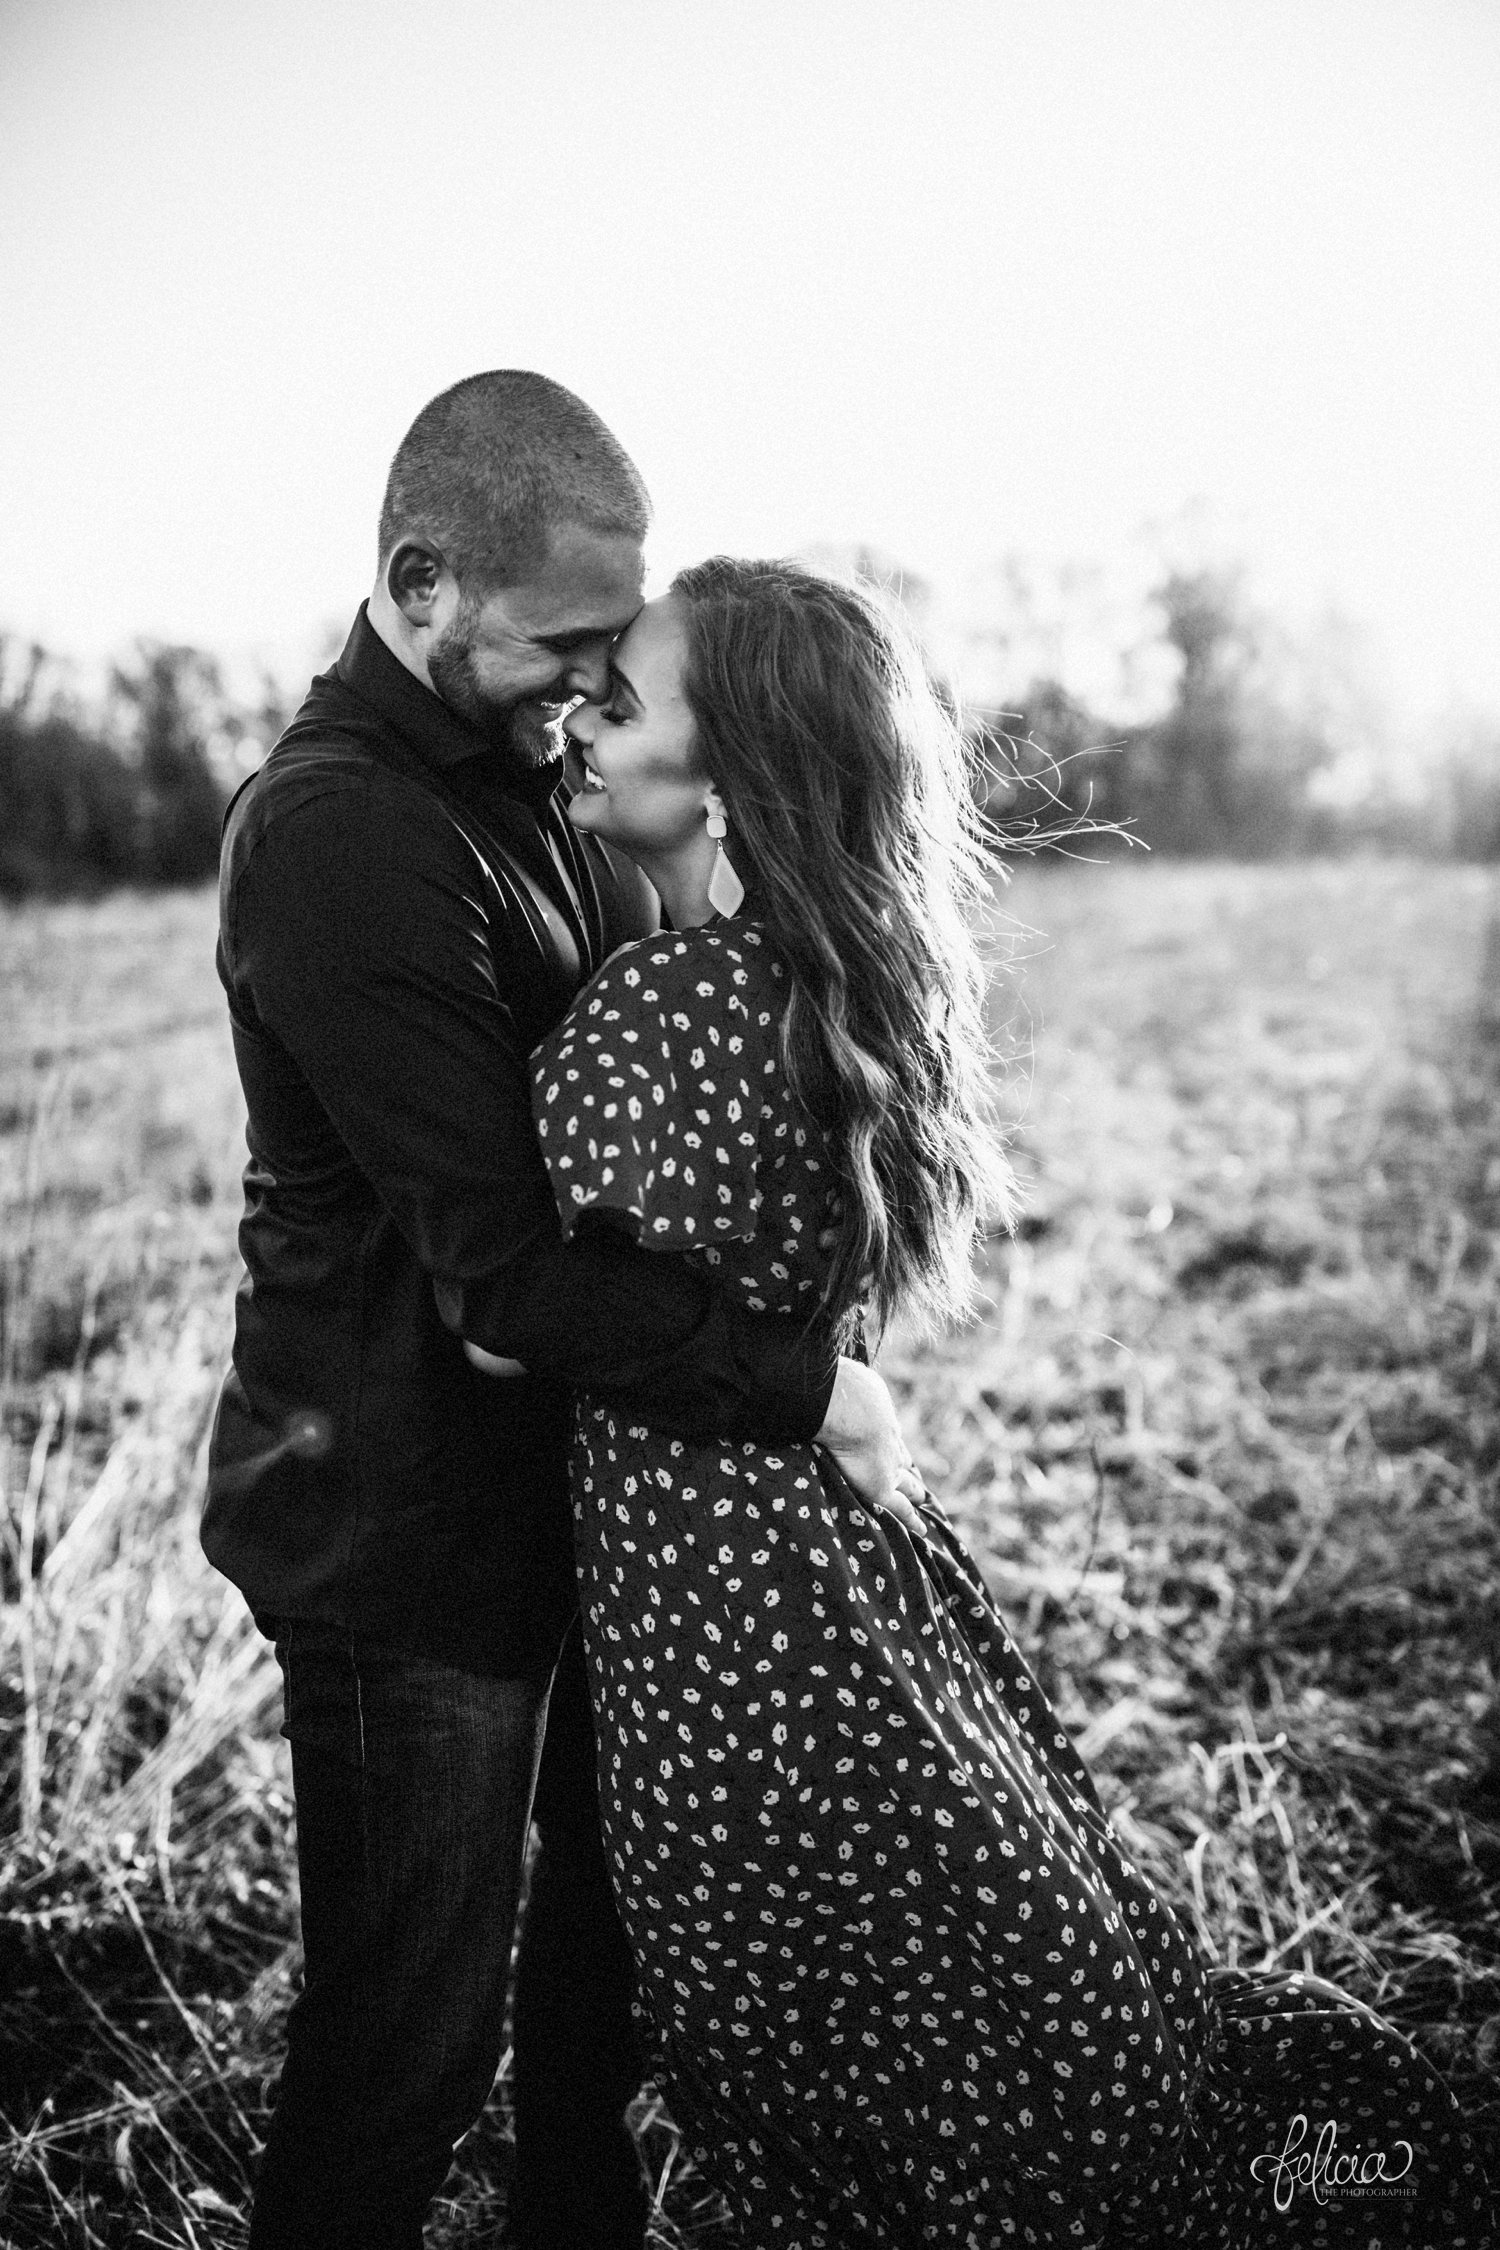 images by feliciathephotographer.com | Burr Oak Woods | engagement photos | wedding photographer | engagement photographer | field | sunrise | hugging | posed | posing | black and white | b&w | posed | posing | smiling | laughter | hug | hugging | floral dress | jeans | 